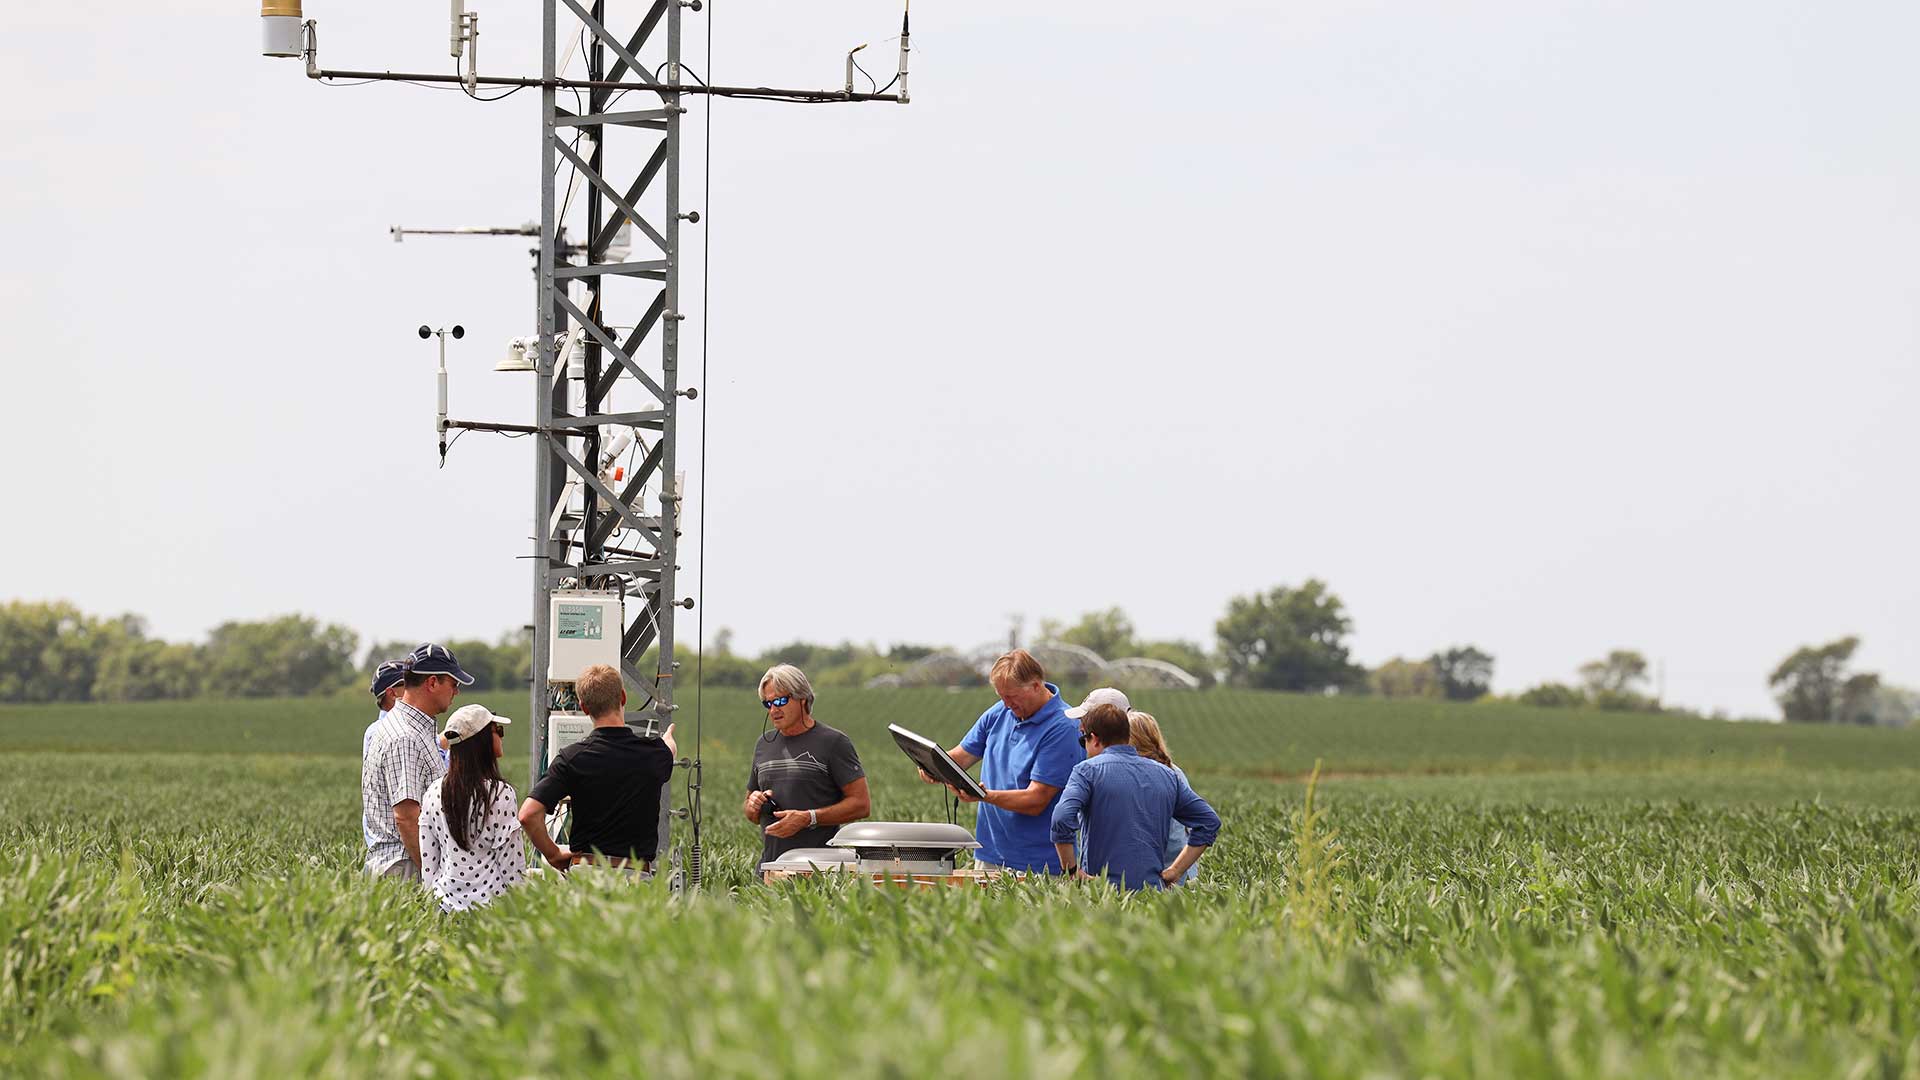 Group working on equipment sensor tower in field